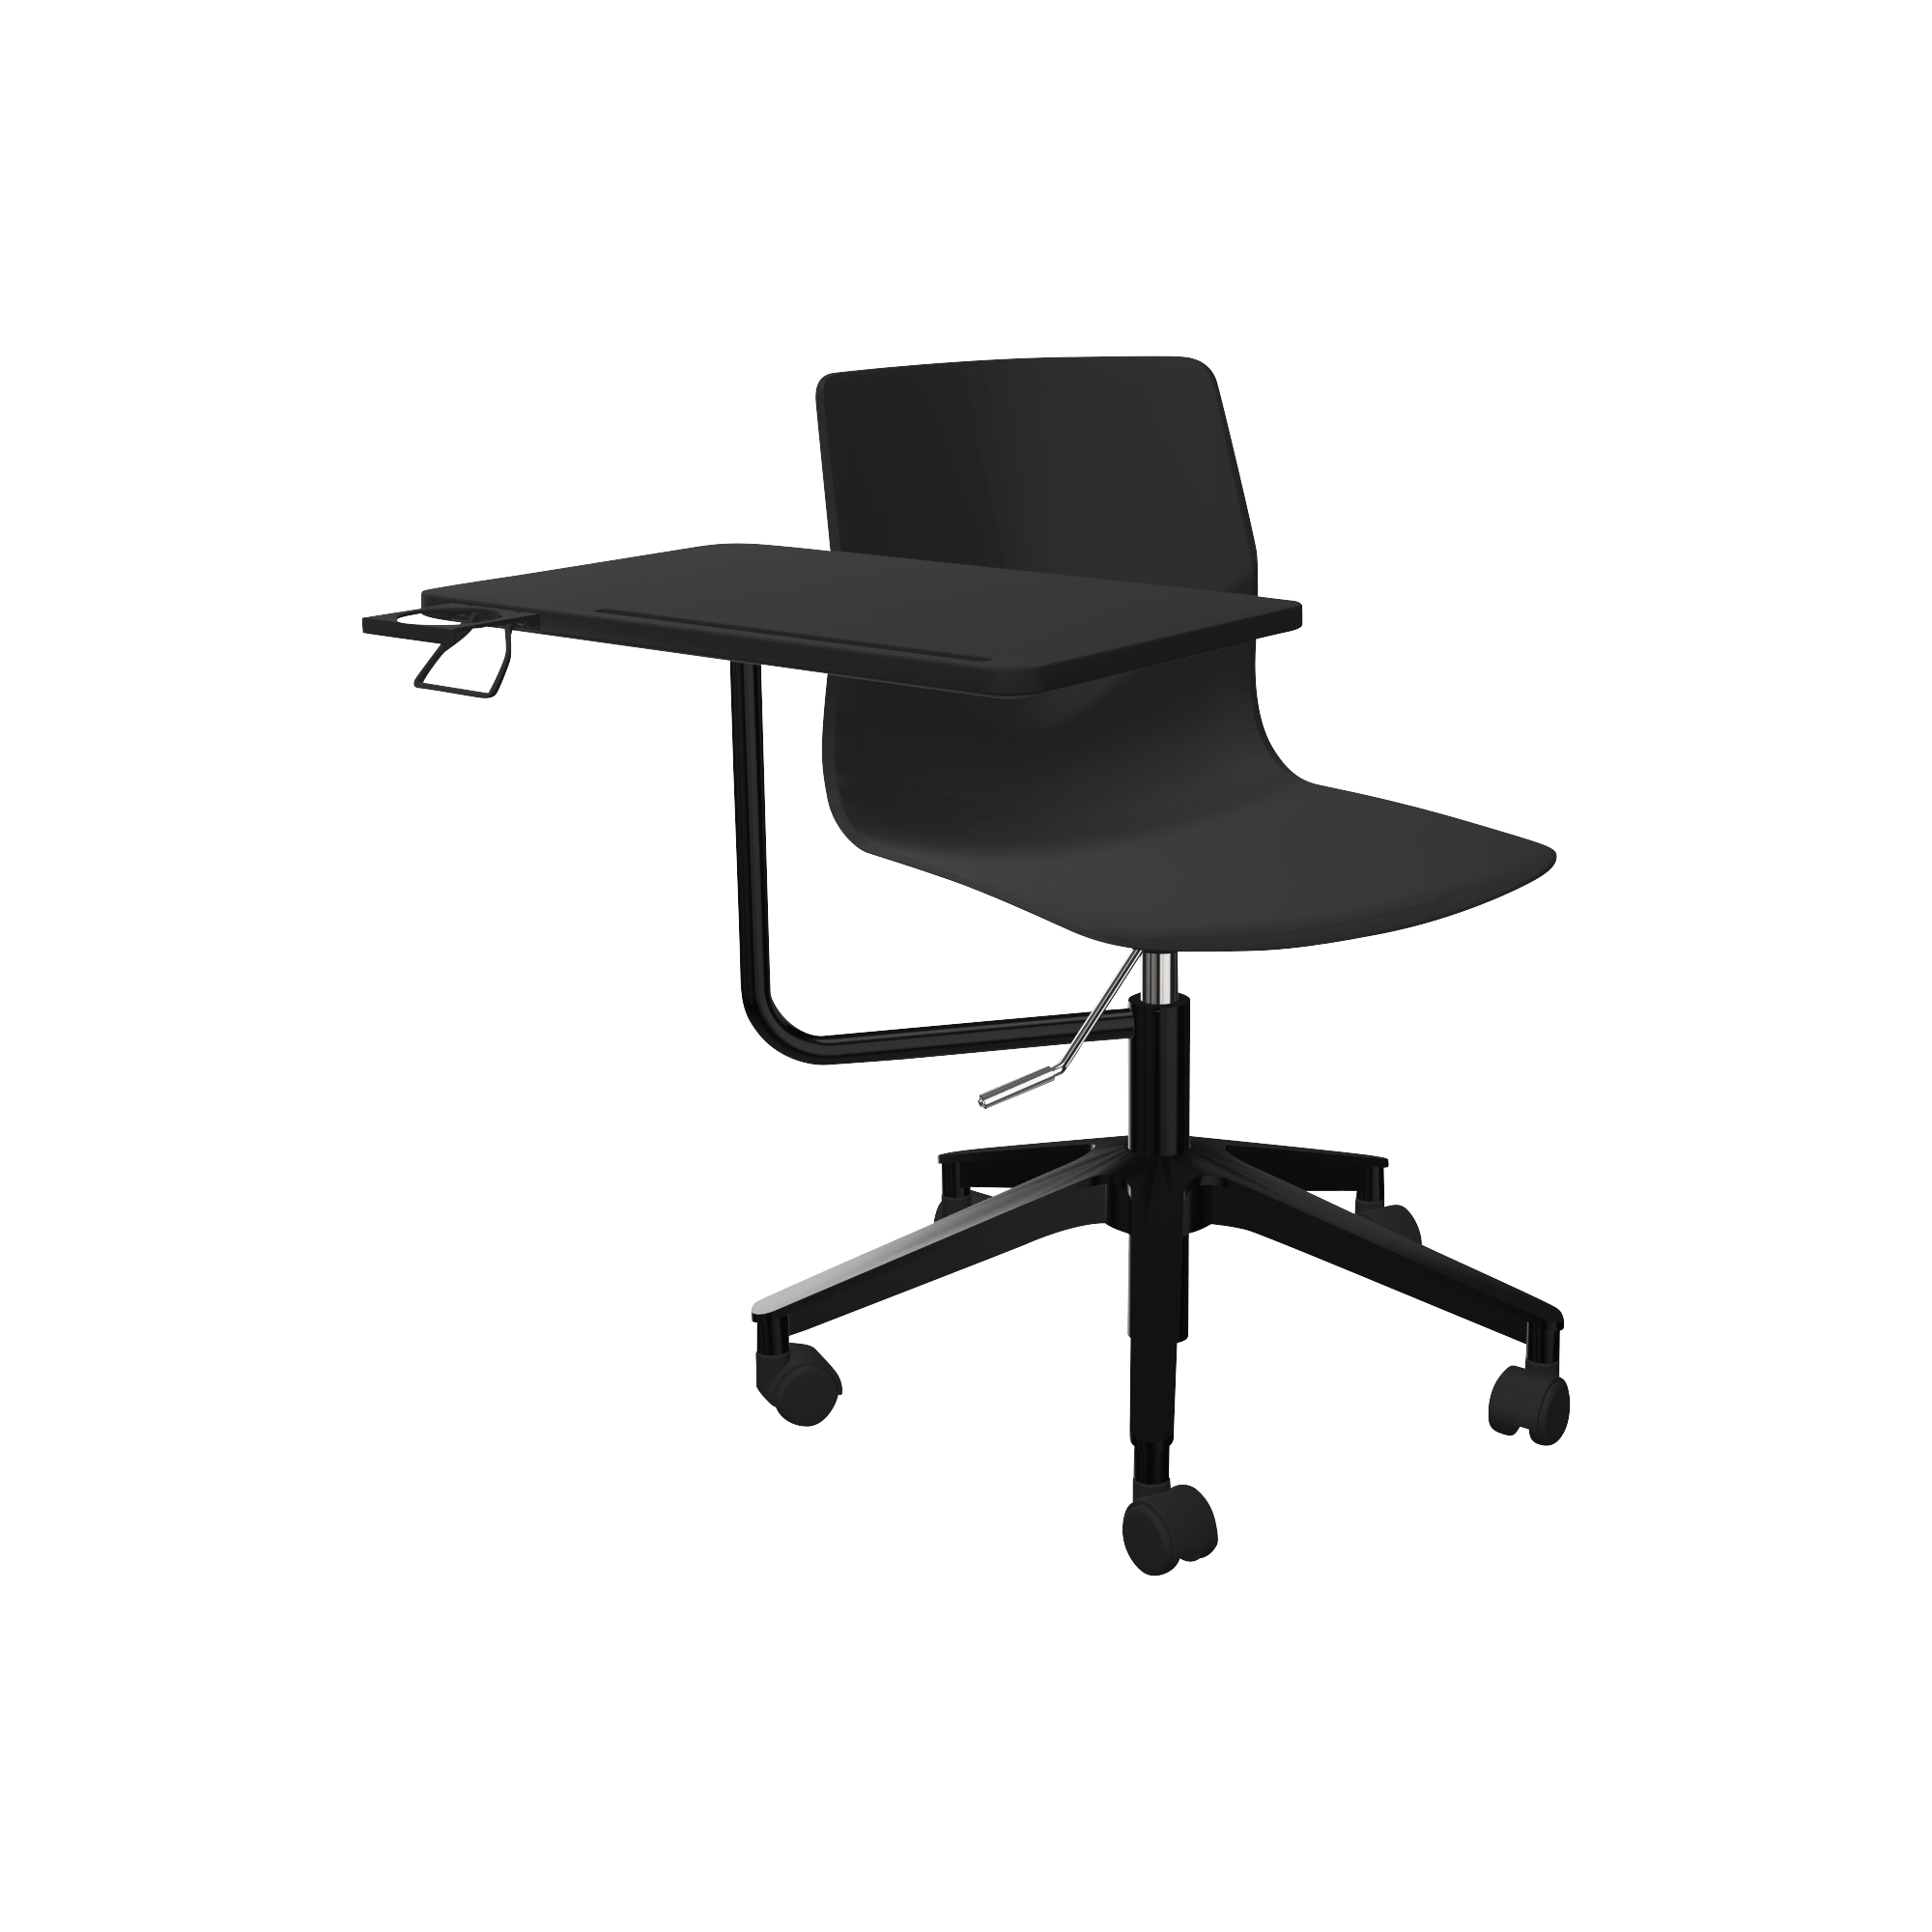 Black pedestal lecture chair with wheels with work desk attached